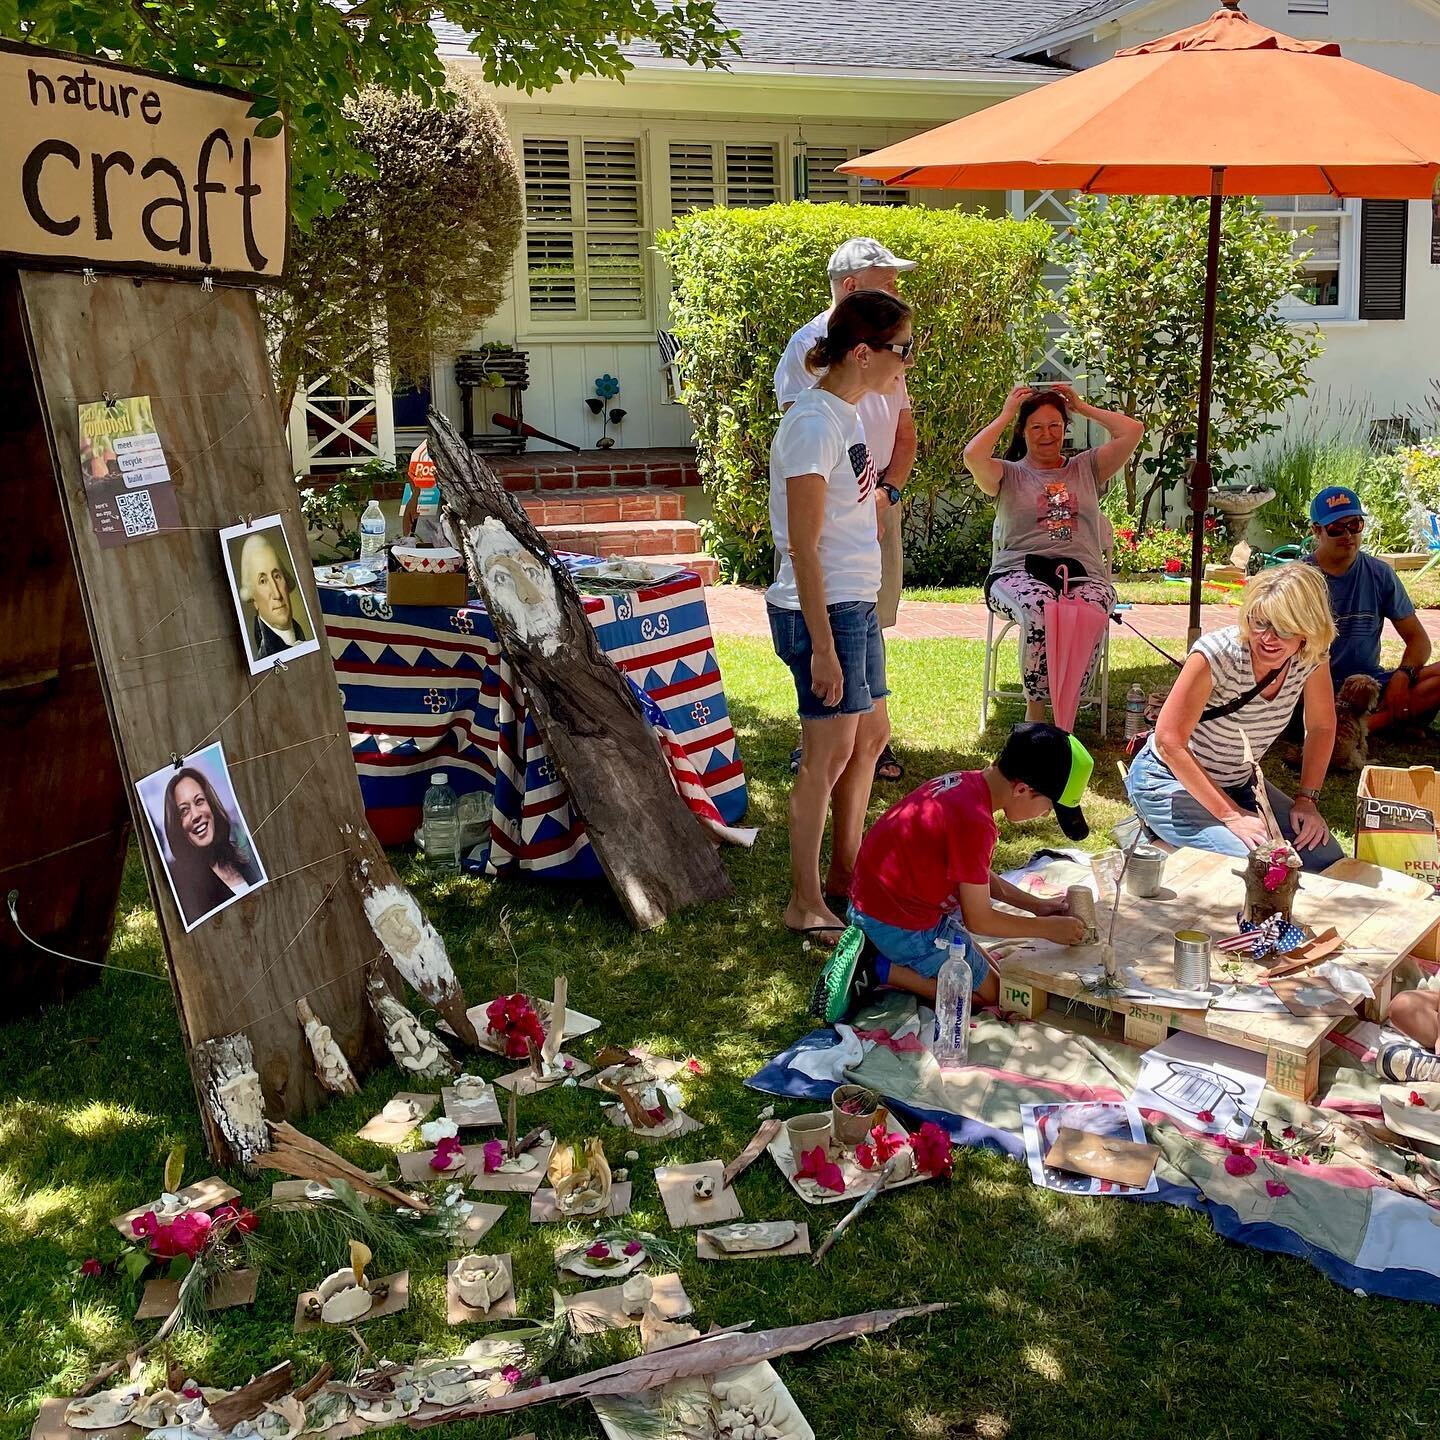 Uncle Sam + Mother Nature 

A super fun day playing with dirt at Colfax Meadows Annual July 4th Block Party. Creative nature crafters blew us away and inspiring to meet neighbors through a &ldquo;compost chat.&rdquo;

We can all reframe a few habits,